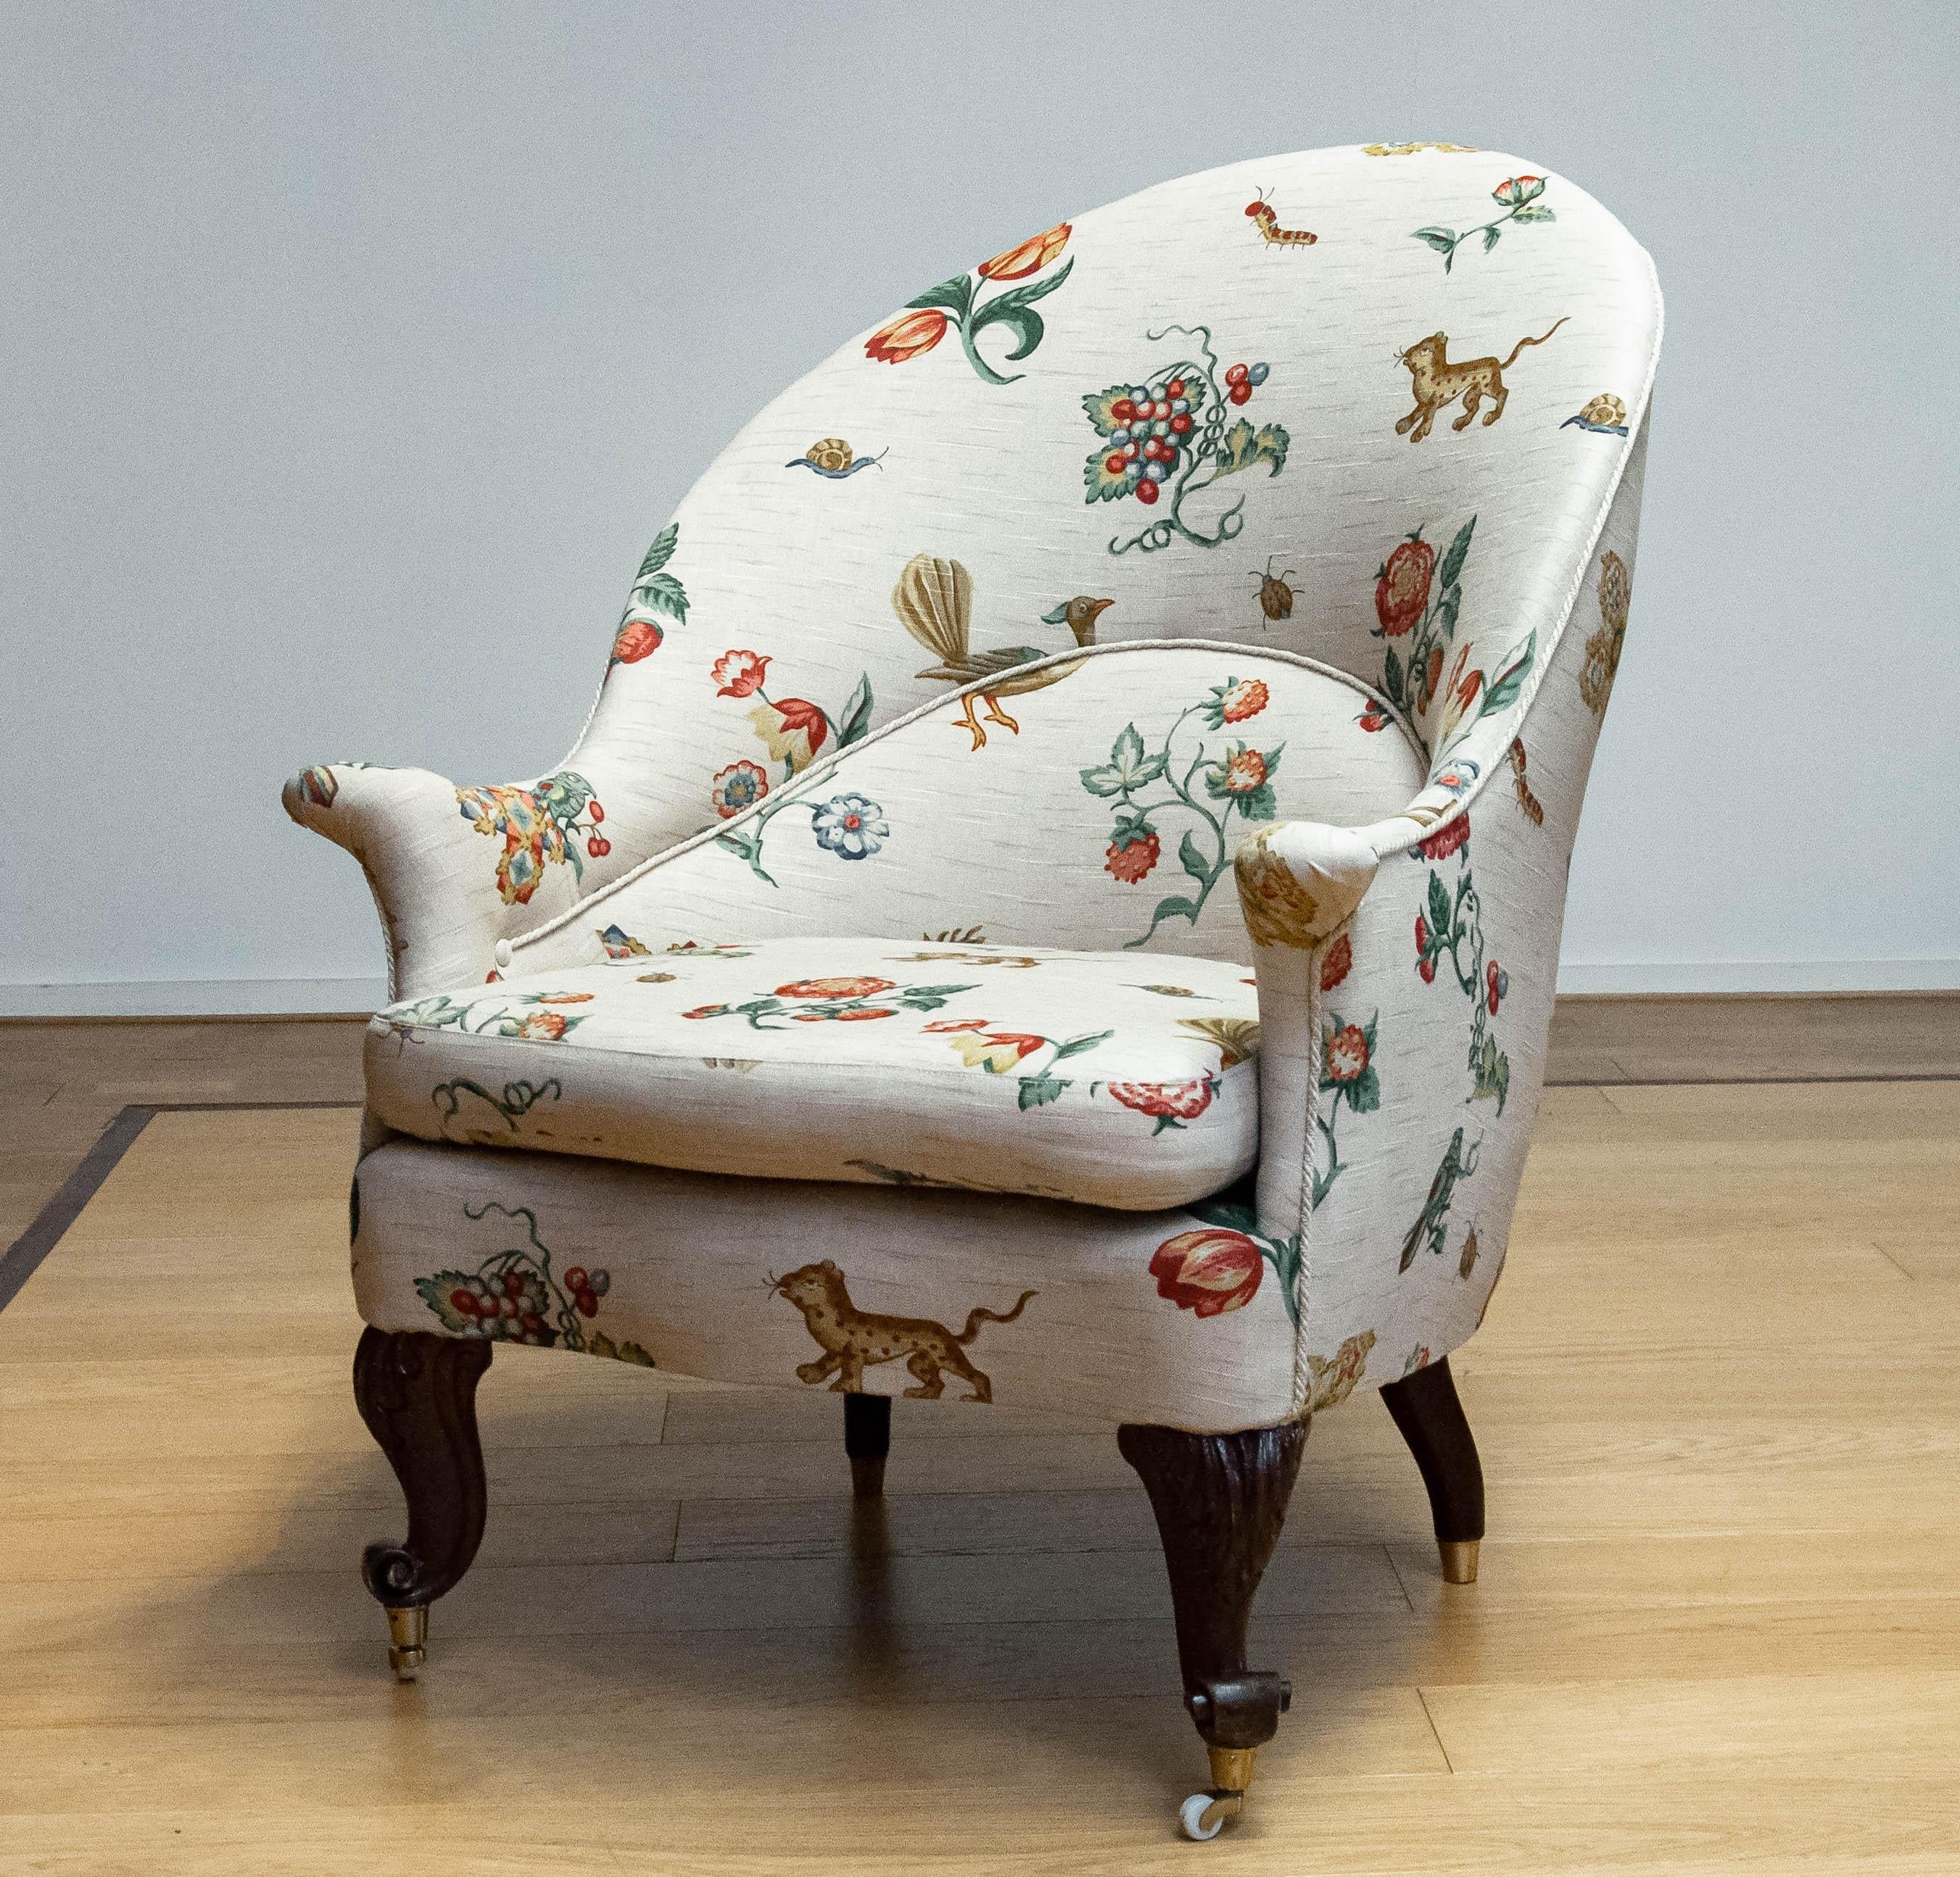 19th Century Swedish Armchair With Linen Flora And Fauna Fantasy Print Fabric For Sale 6